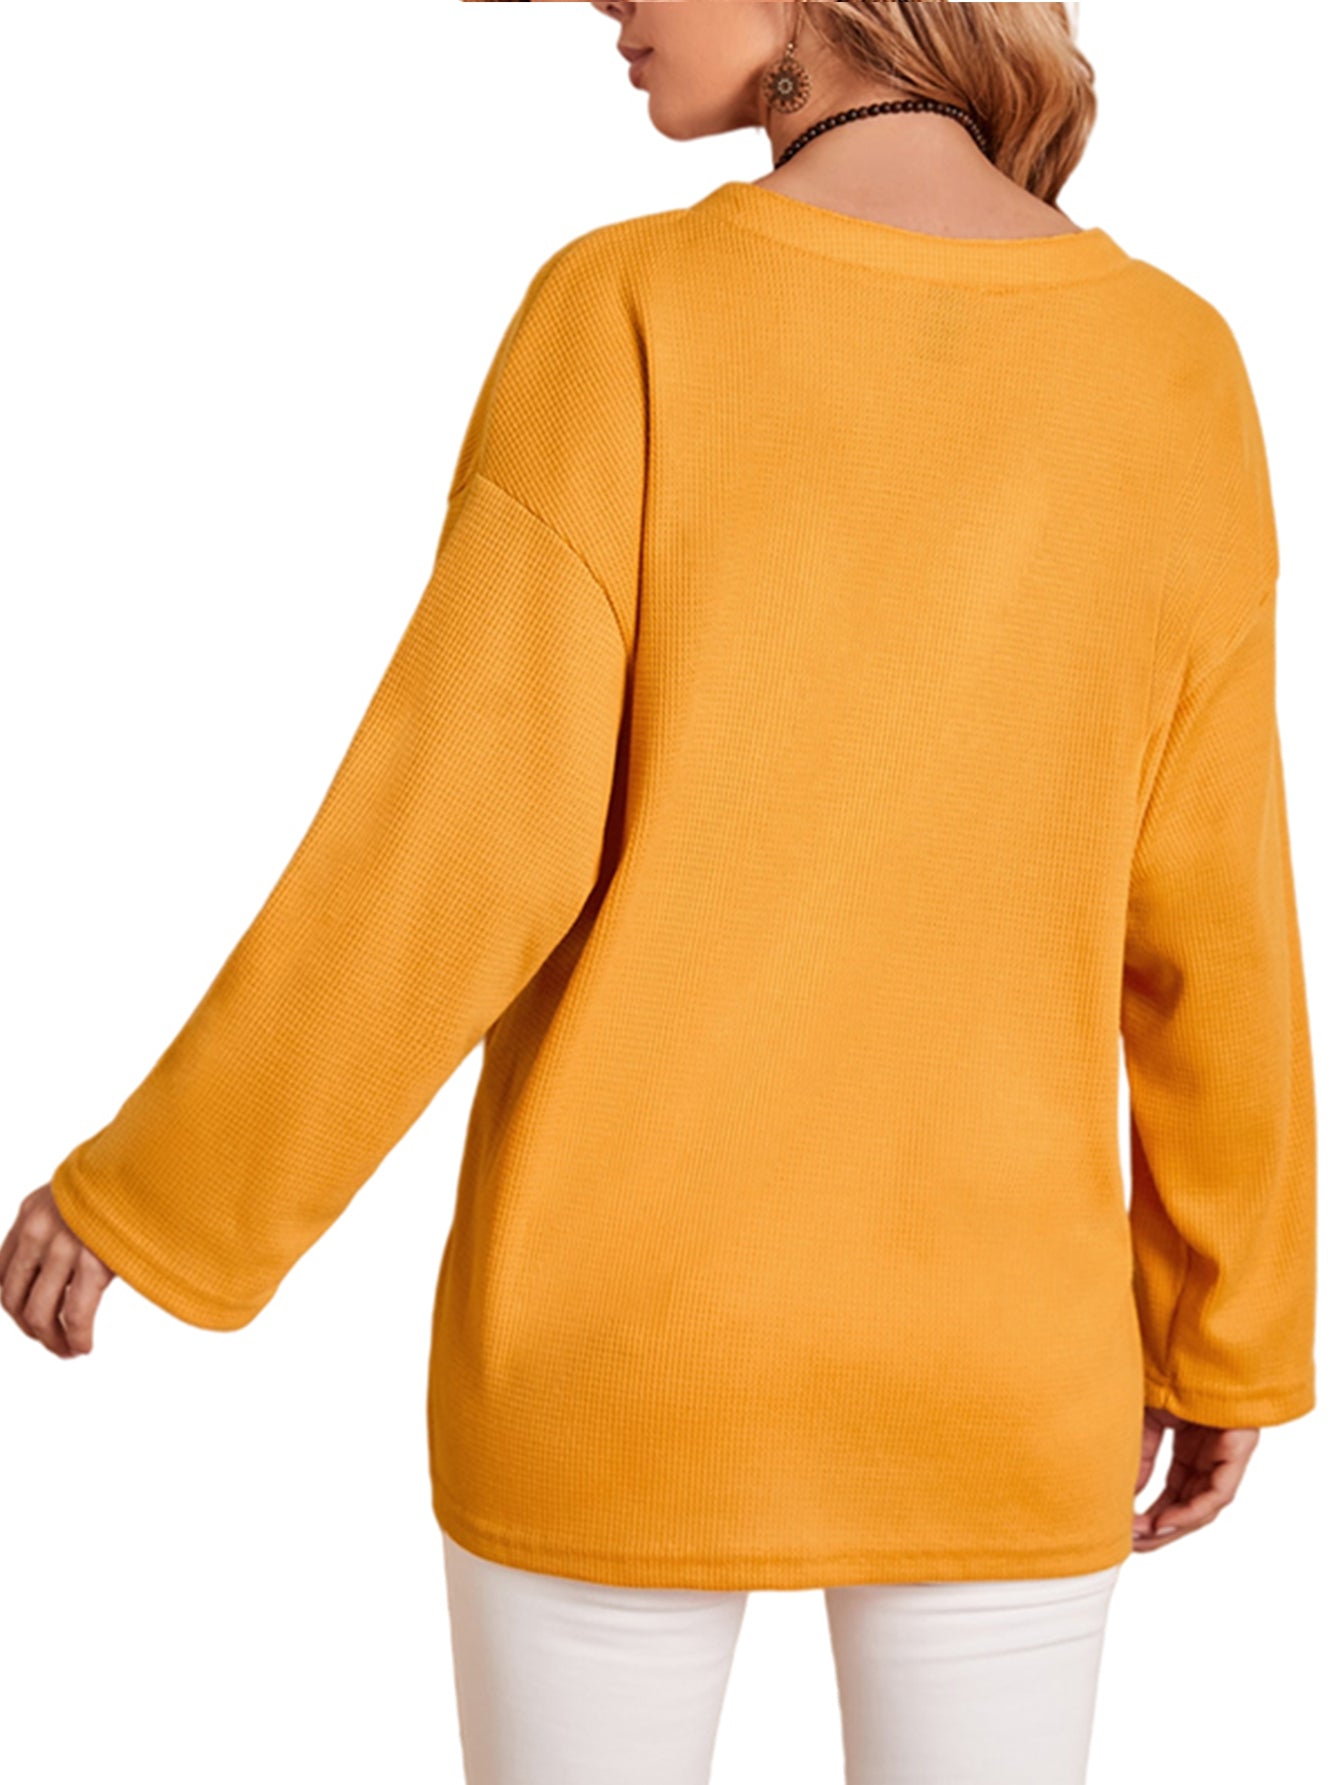 Yellow Solid Color Casual V Neck Shirt Sai Feel